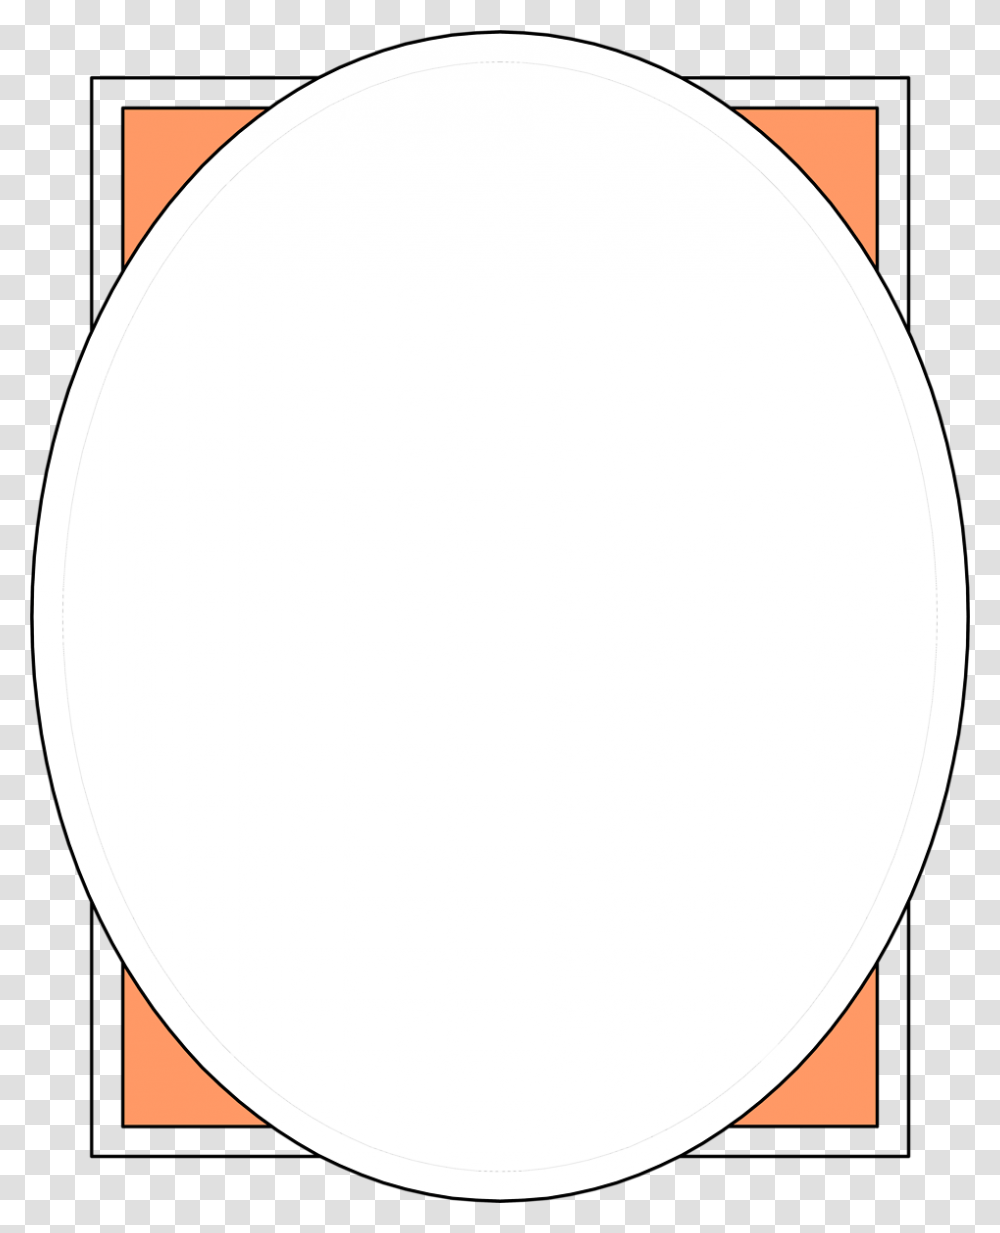 Border Free Stock Photo Illustration Of A Blank Oval Picture, Balloon, Egg, Food Transparent Png